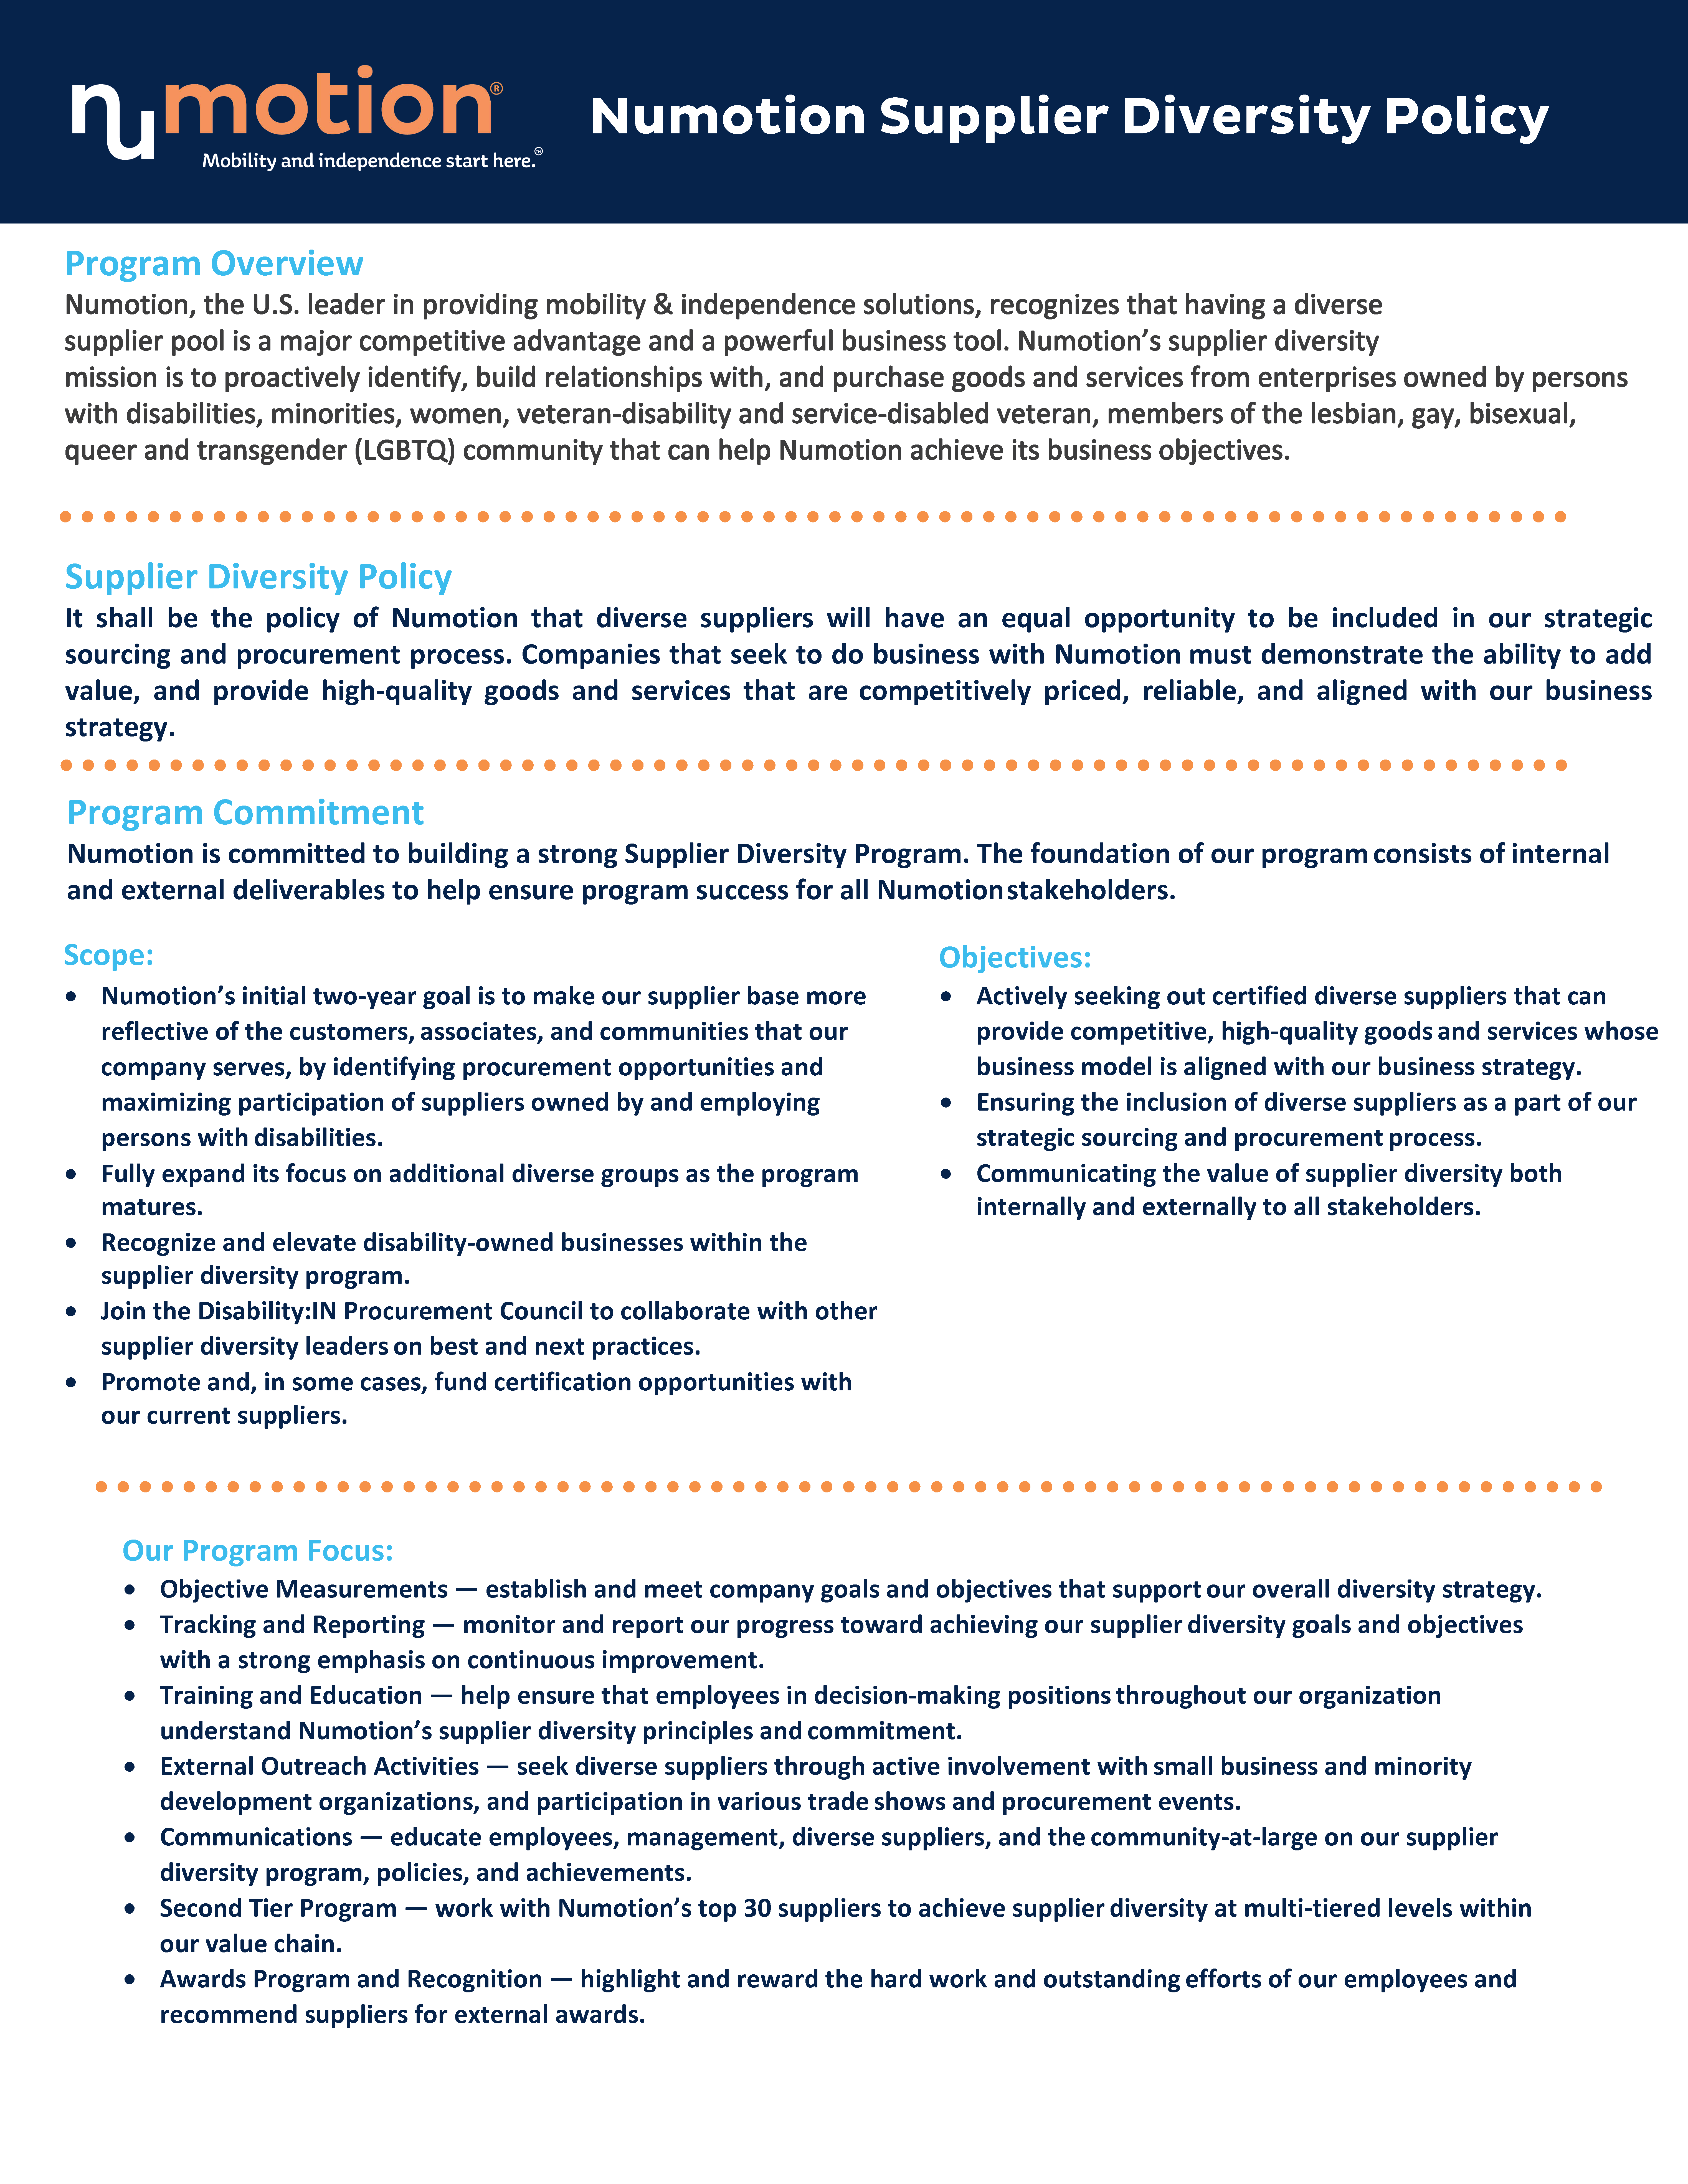 Numotion-Supplier-Diversity-Policy-v4.png